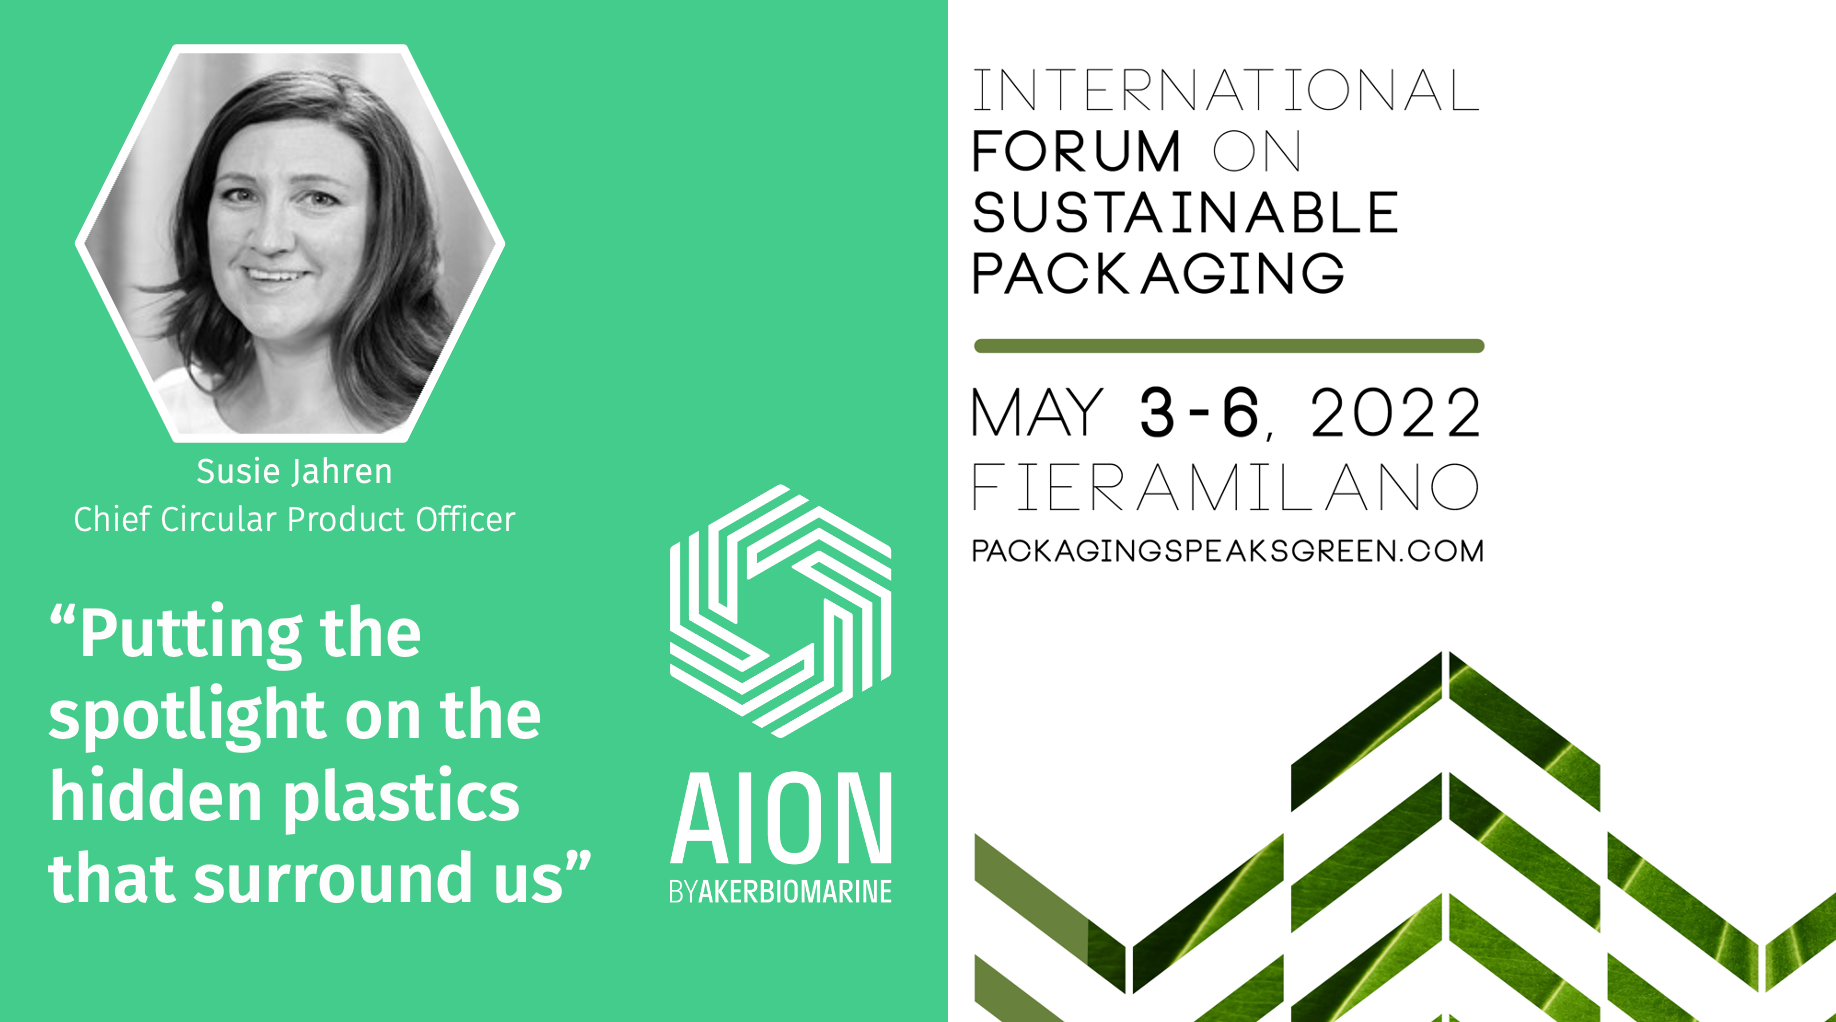 Susie Jahren, Chief Circular Product Officer at AION, will speak at Green Plast 2022 conference